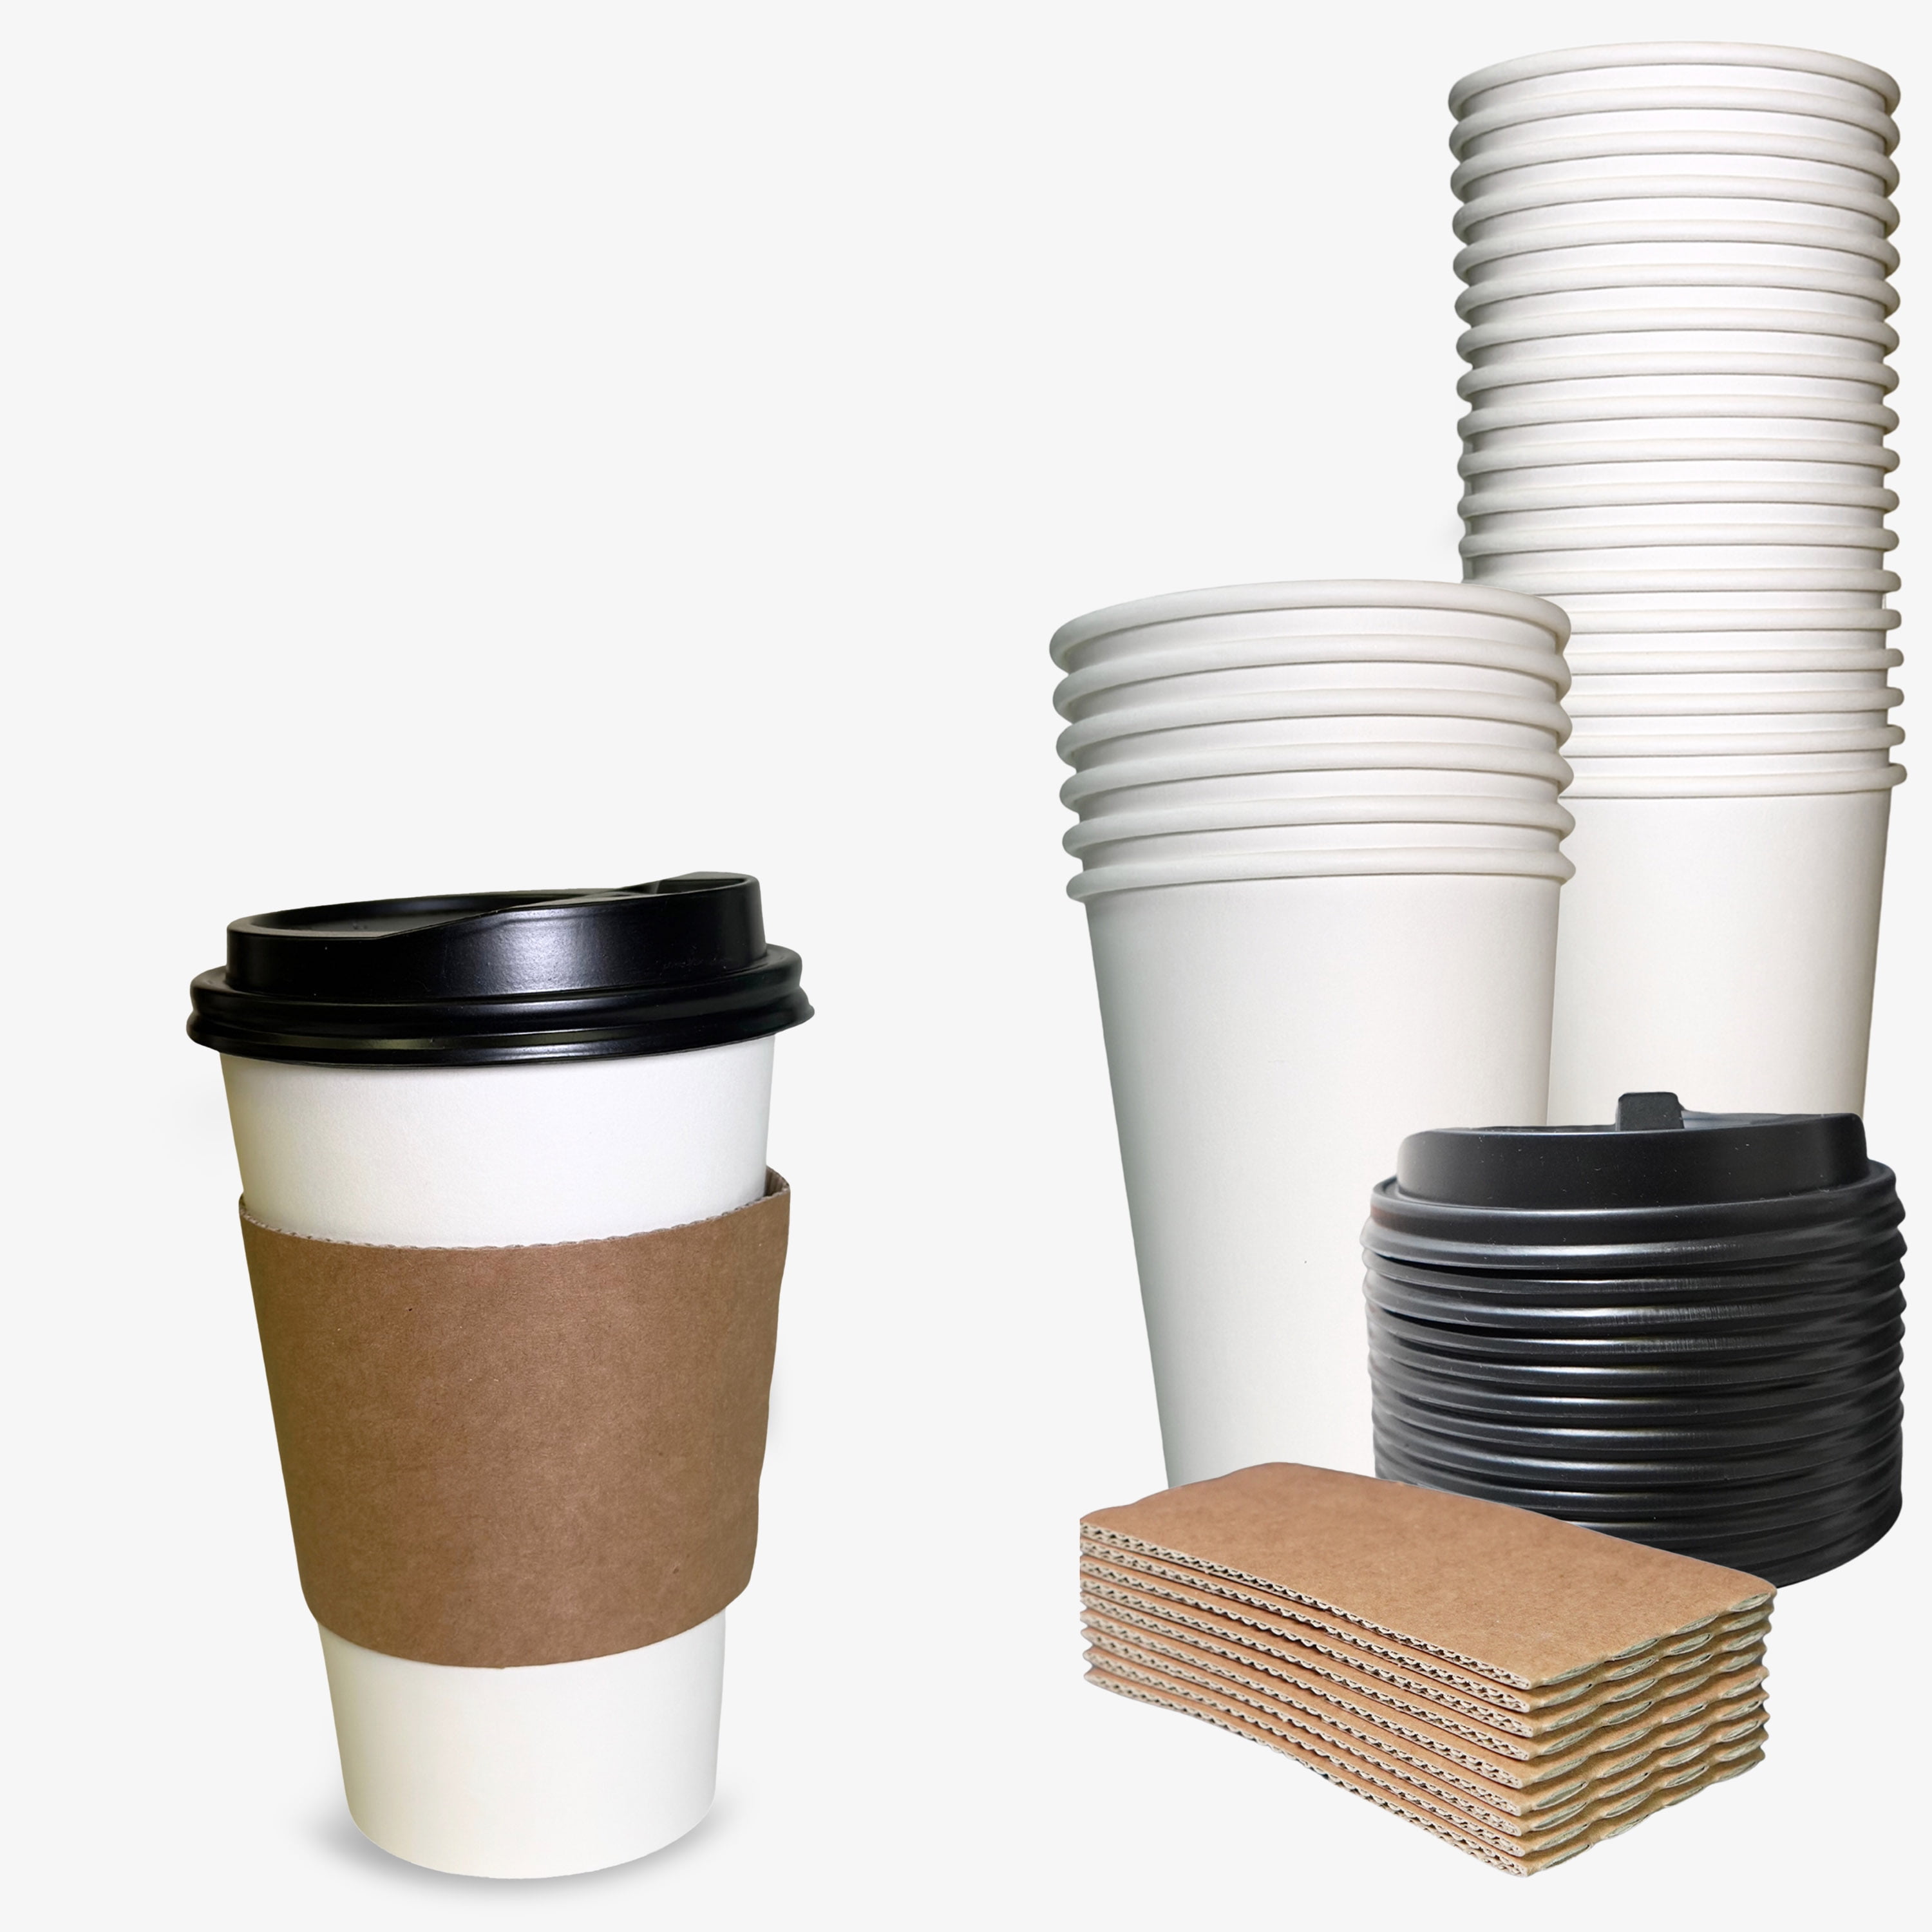 [200 Pack] 16oz Disposable White Paper Coffee Cups with Black Dome Lids -  For Hot, Cold Drink, Coffee, Tea, Cocoa, Travel, Office, Home, Cider, Hot